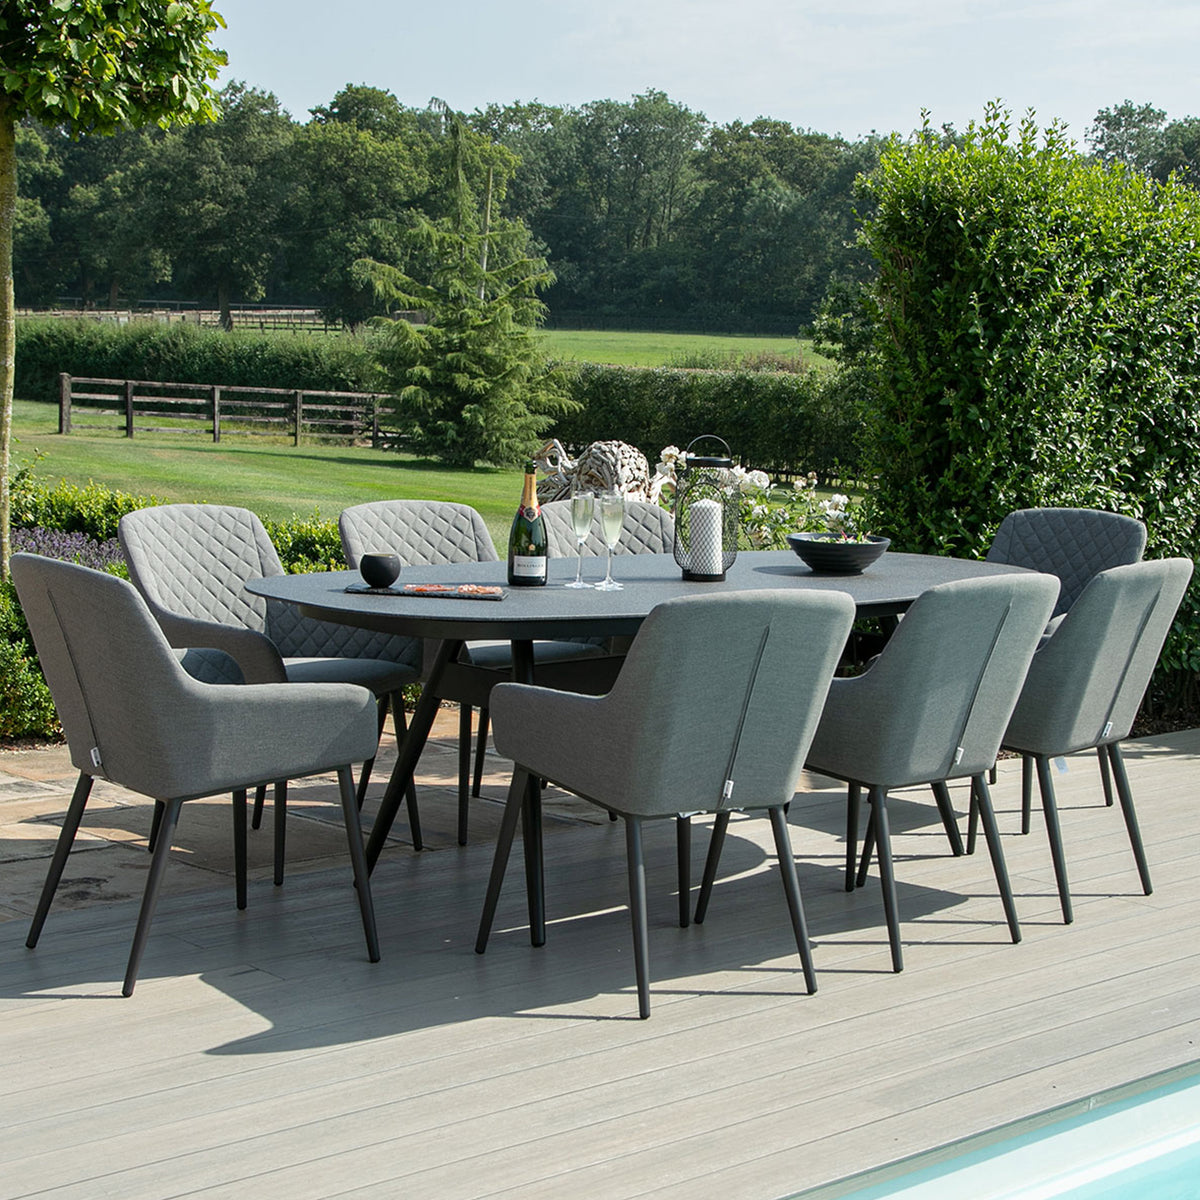 Maze Zest Grey 8 Seat Outdoor Oval Dining Set from Roseland Furniture